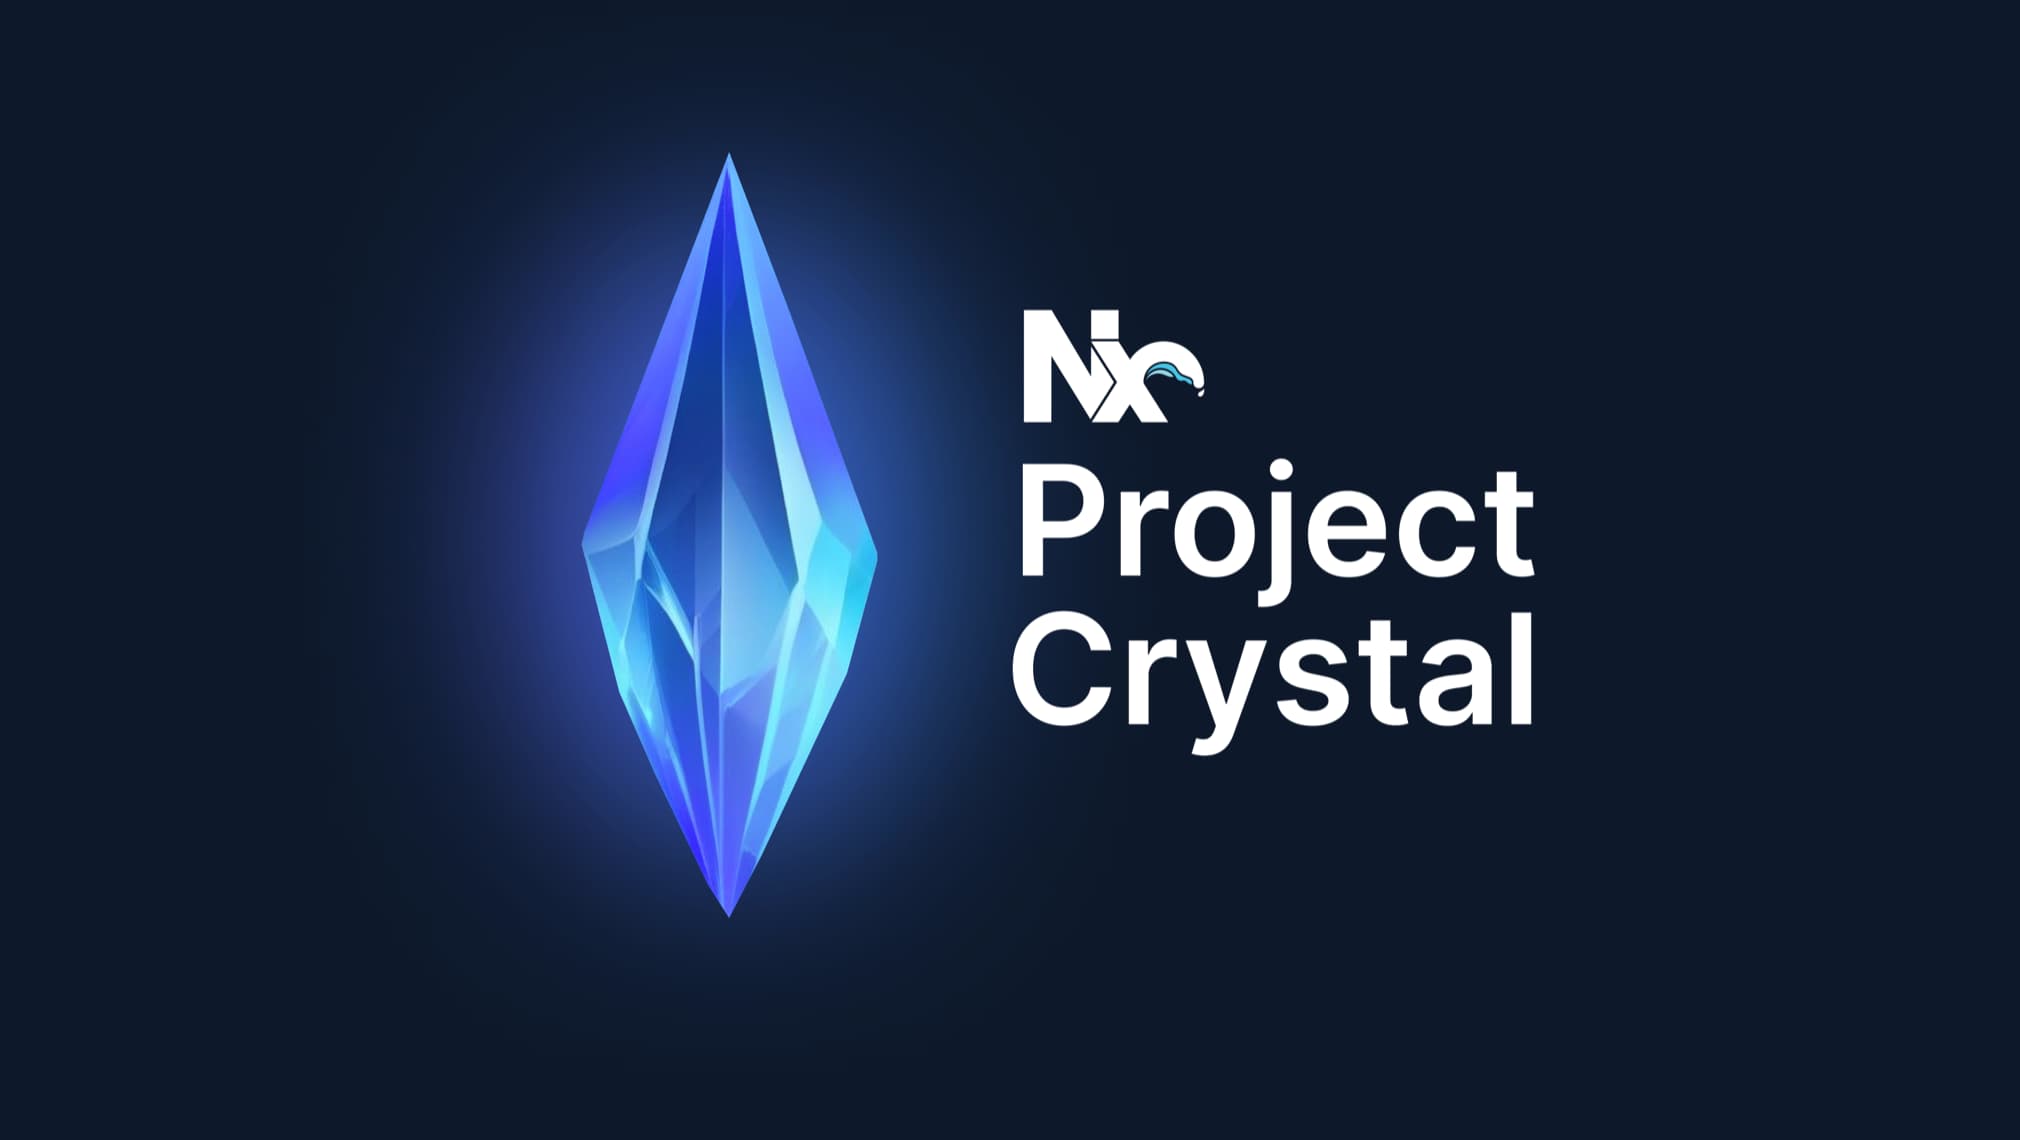 Nx Project Crystal